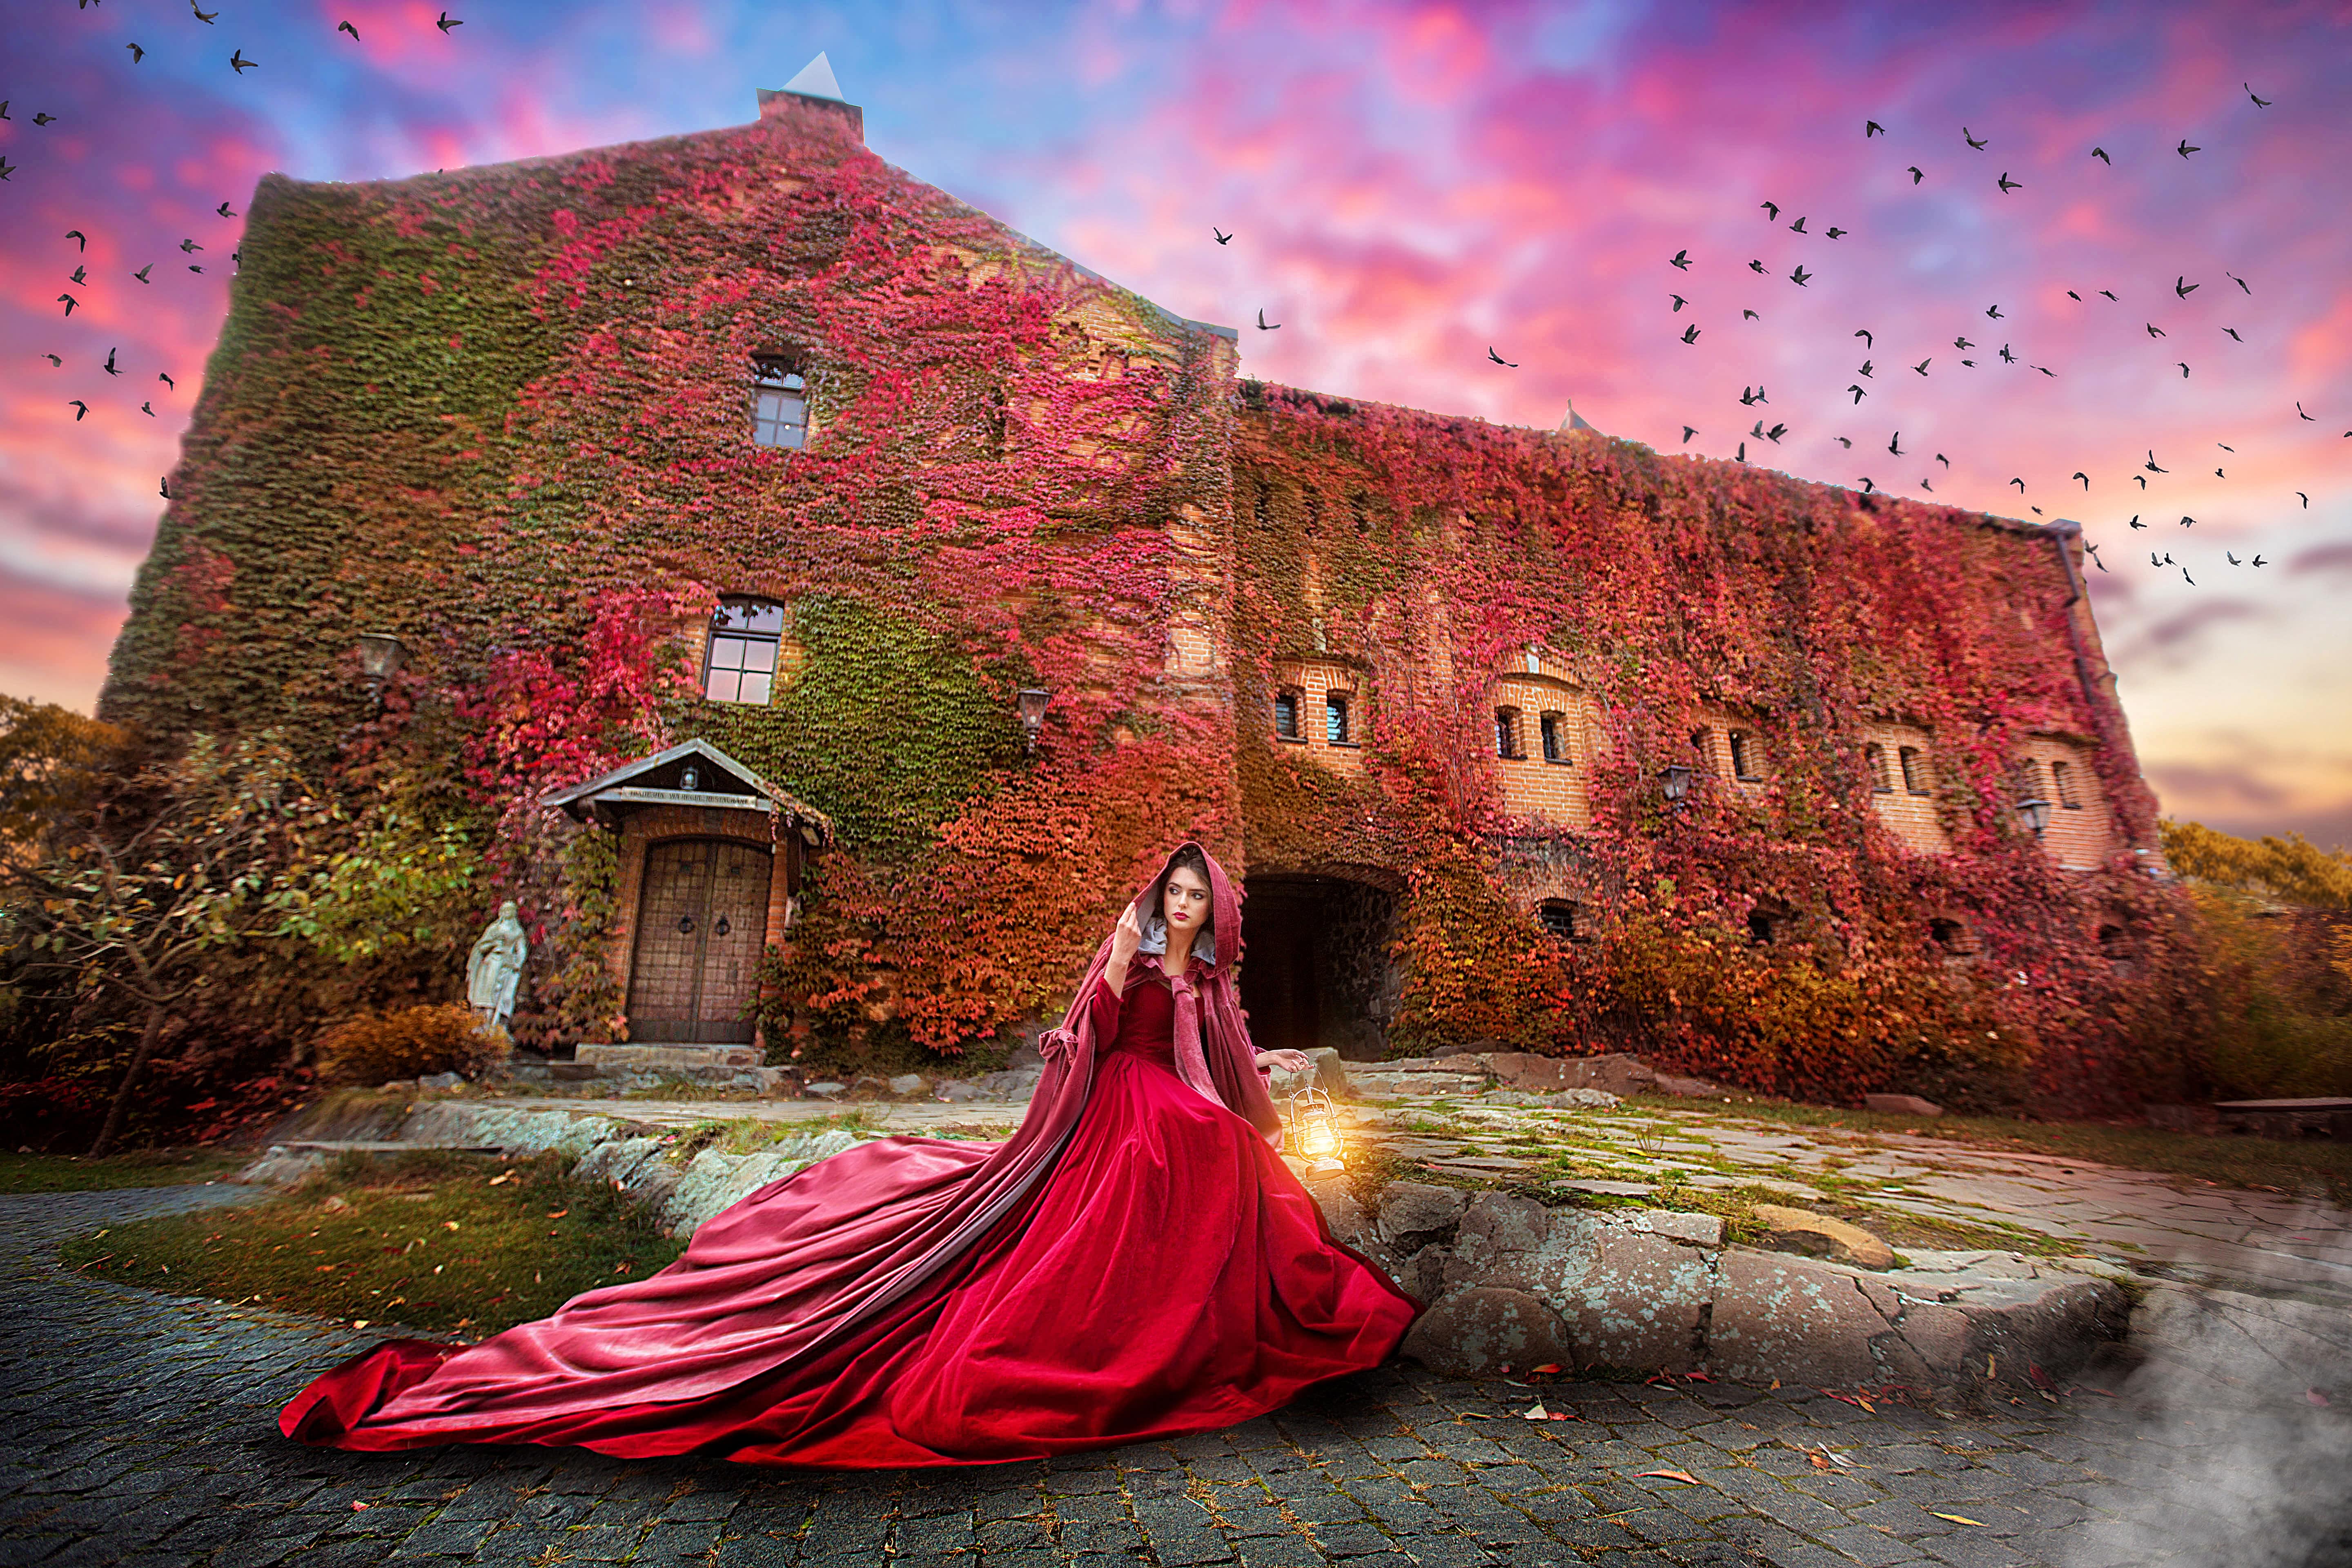 Beautiful lady in a burgundy coat and red dress sitting on the ground with a castle behind her